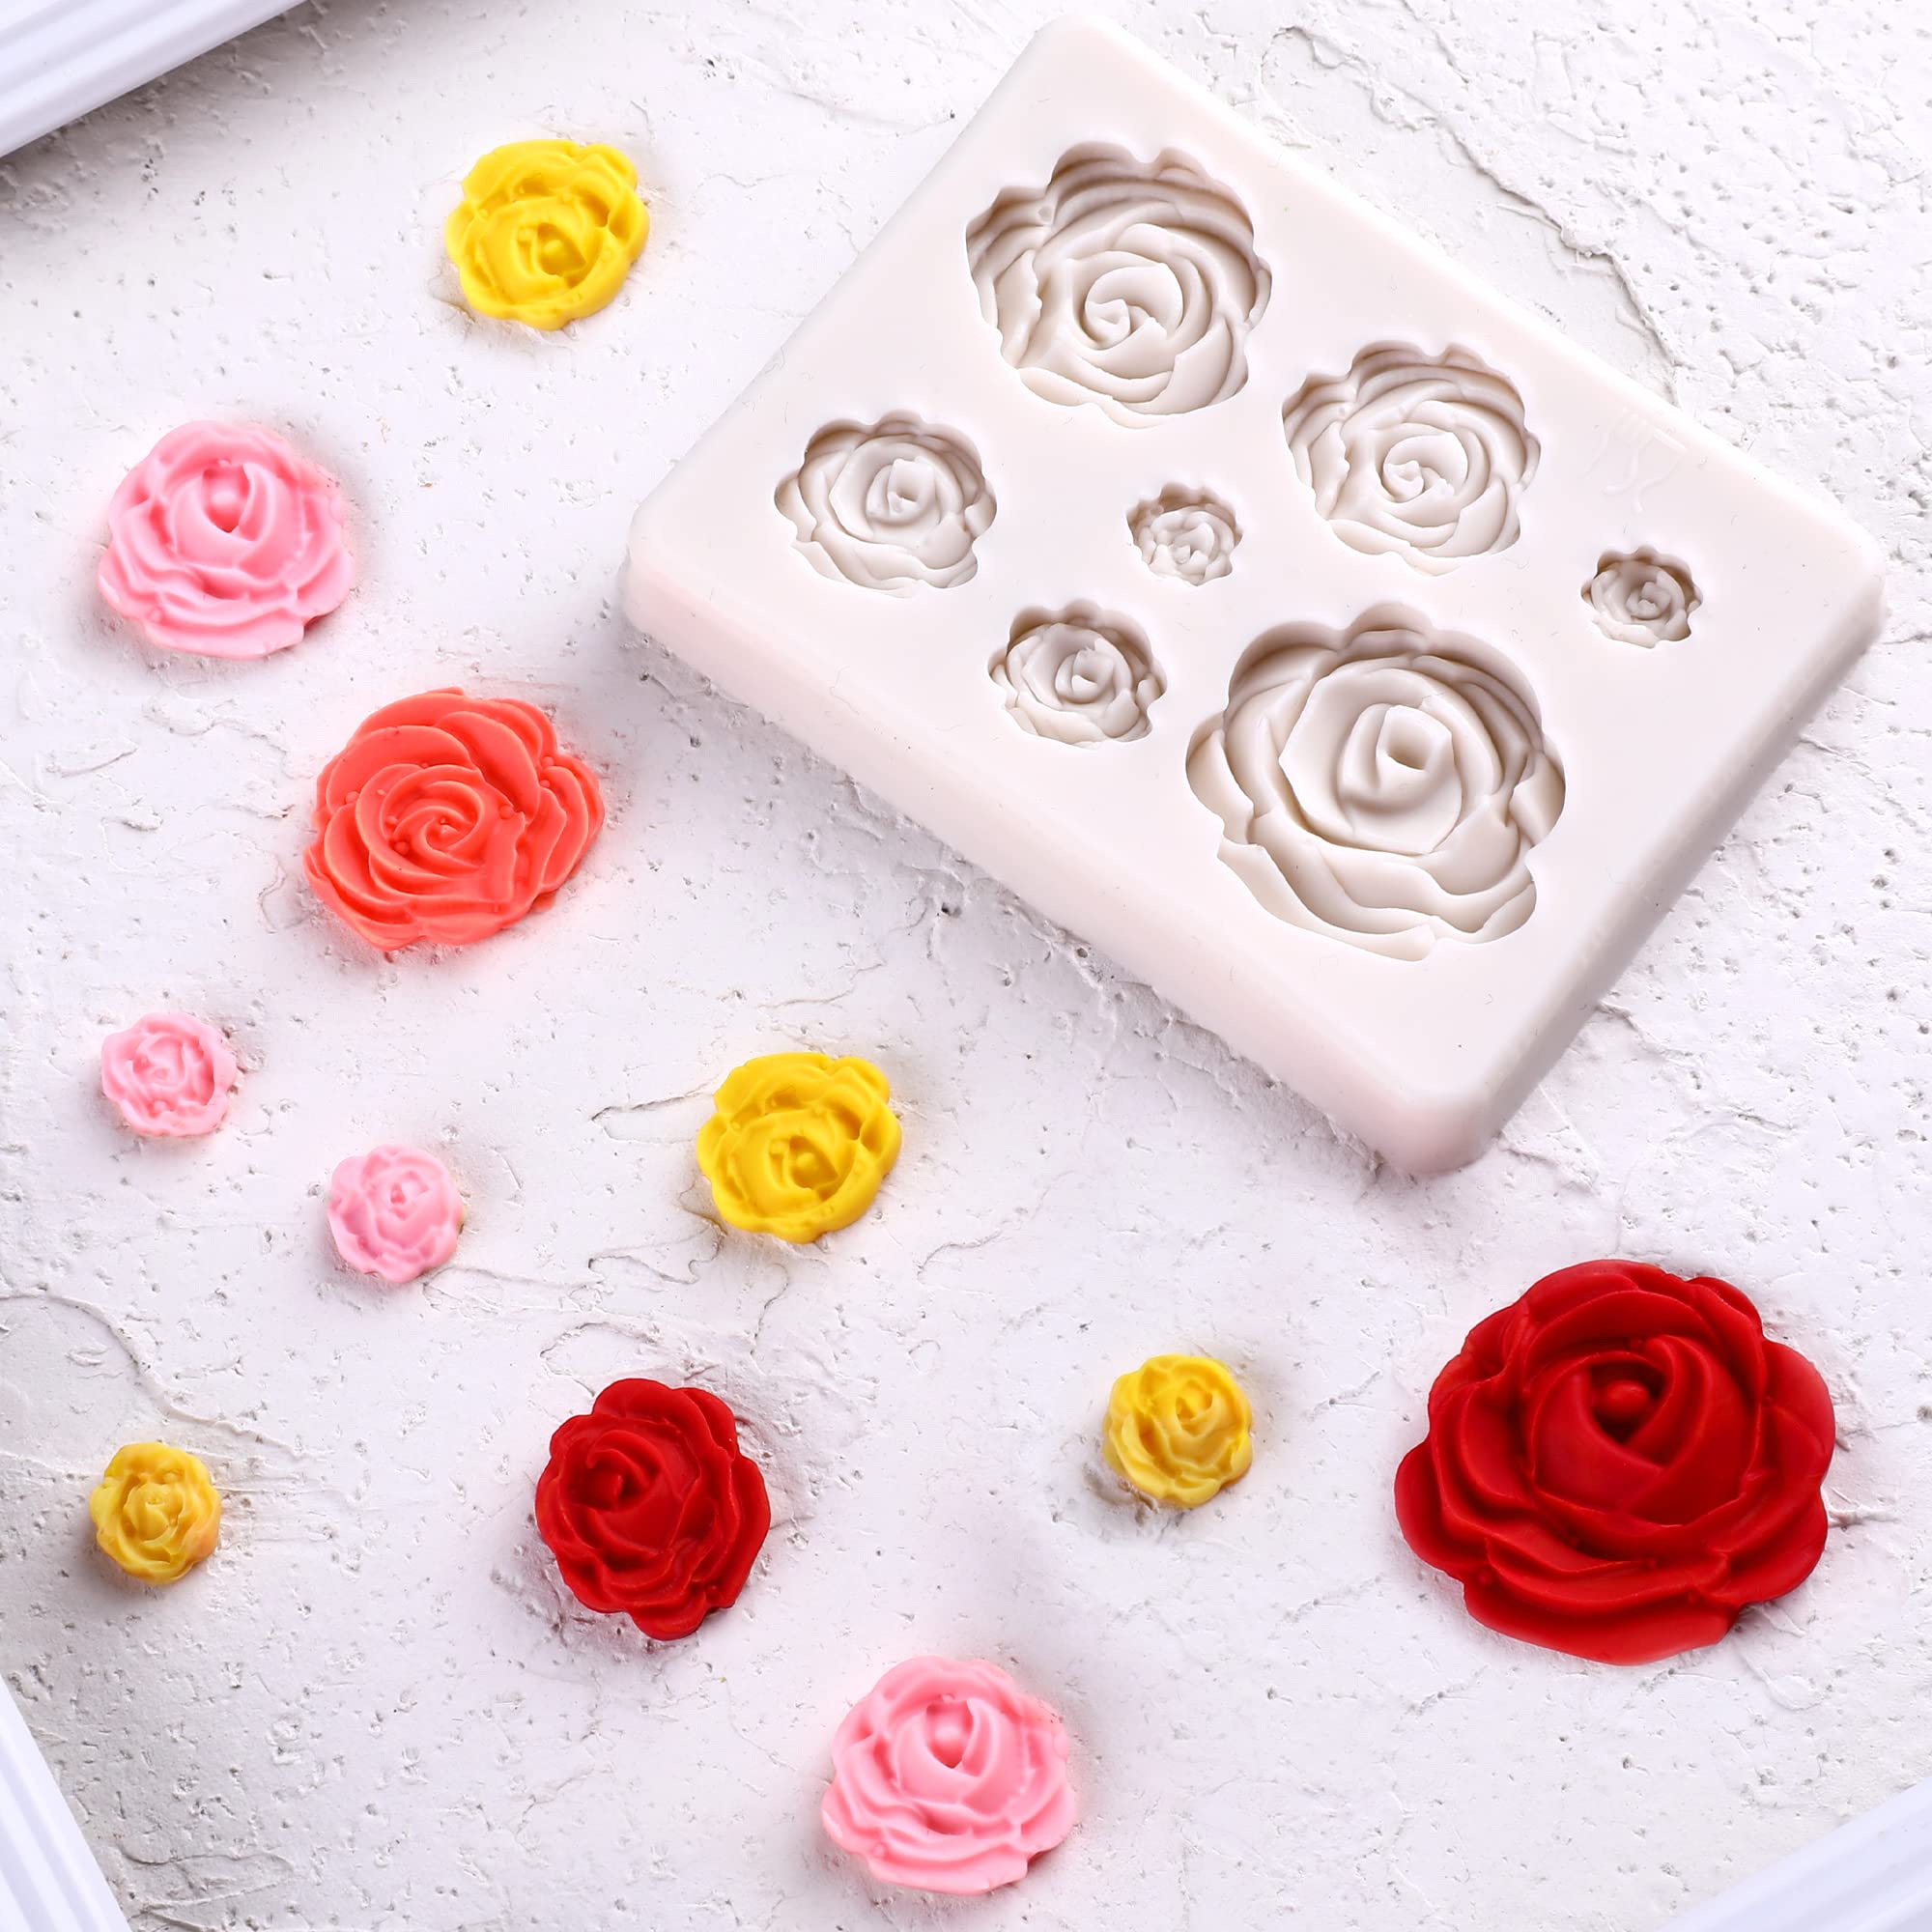 Puocaon Flowers Polymer Clay Molds 4 Pcs